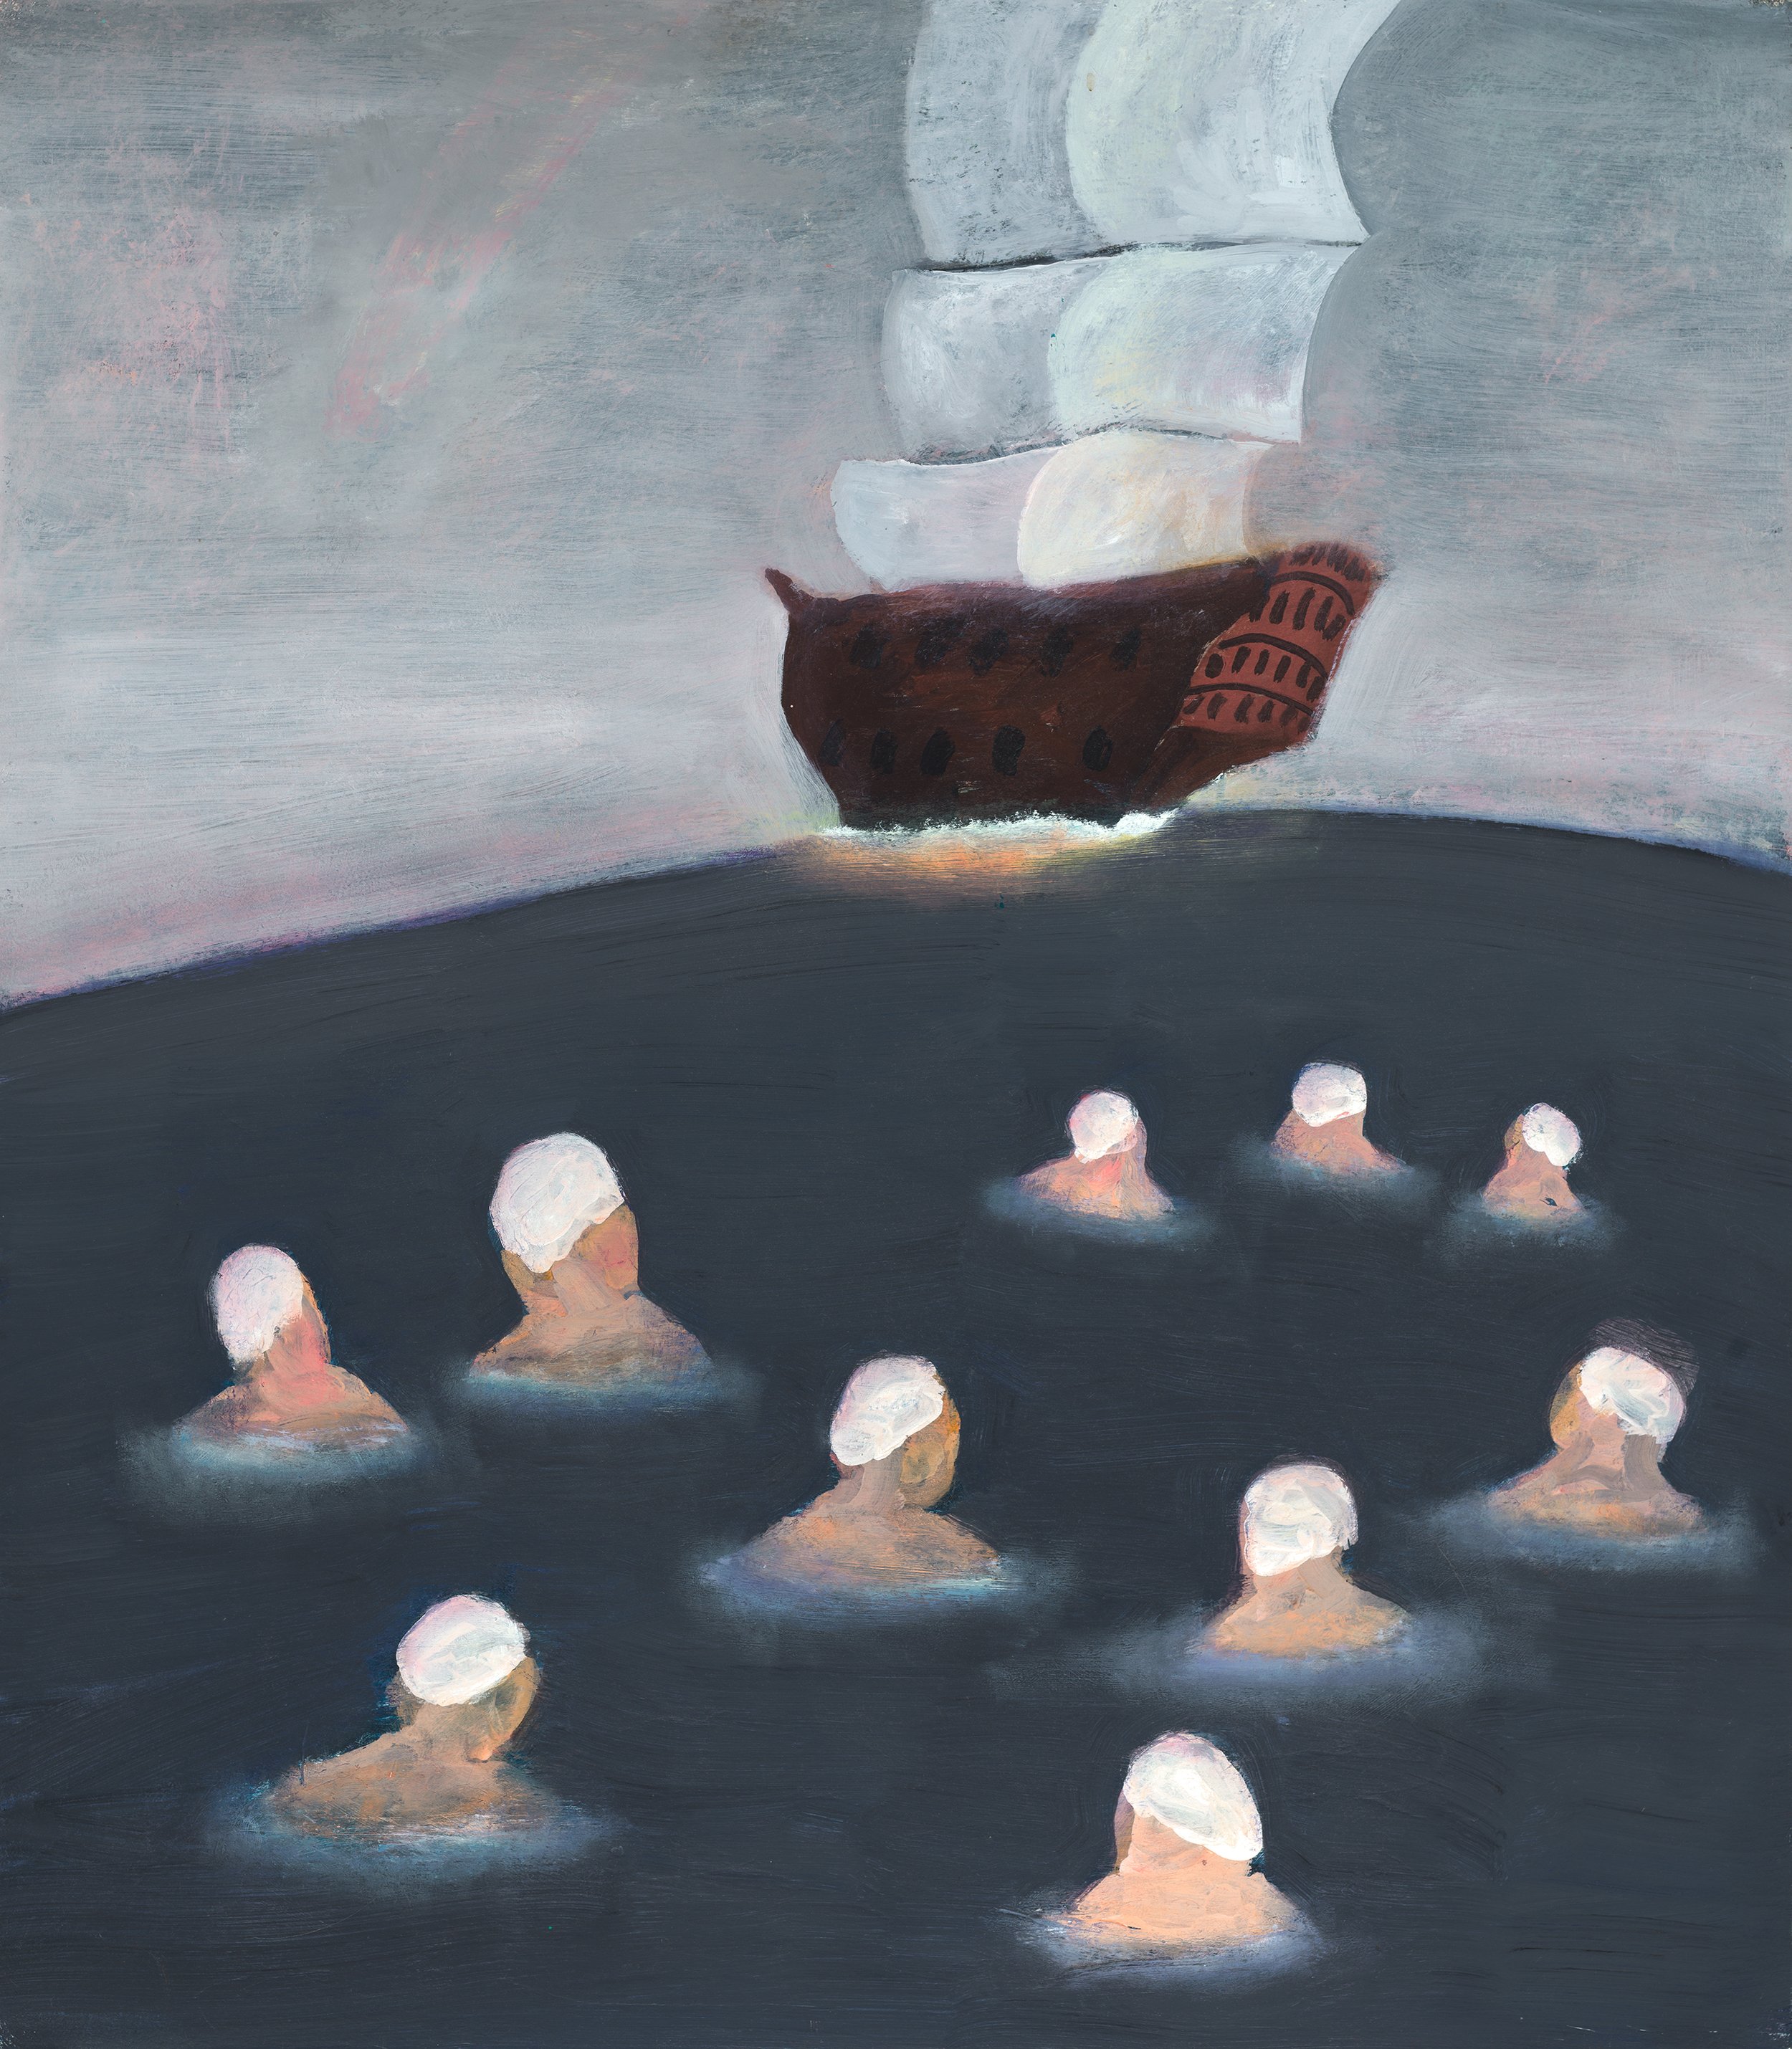  Katherine Bradford (United States, born 1942),  Mother Ship , 2006, oil on canvas, 30 x 24 inches. Collection of William Finn and Arthur Salvador © Katherine Bradford. Image courtesy Stephen Petegorsky Photography  